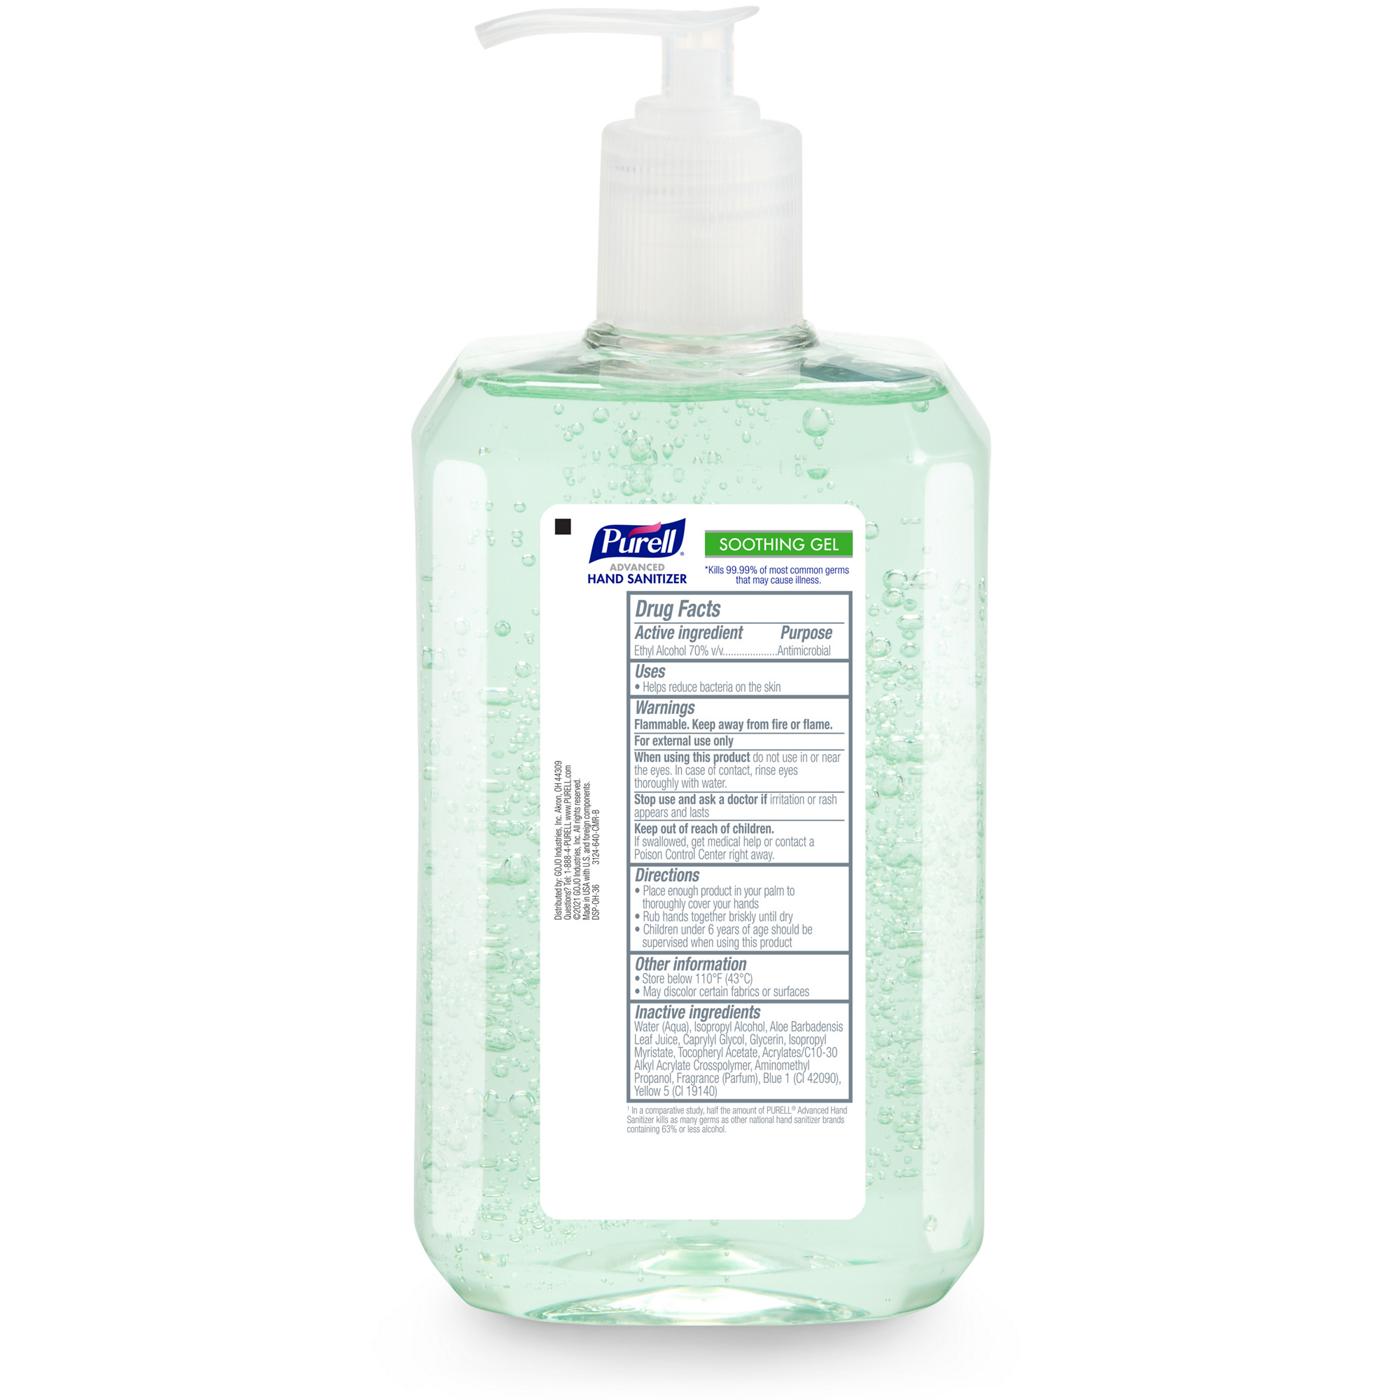 Purell Advanced Hand Sanitizer - Soothing Gel; image 2 of 4